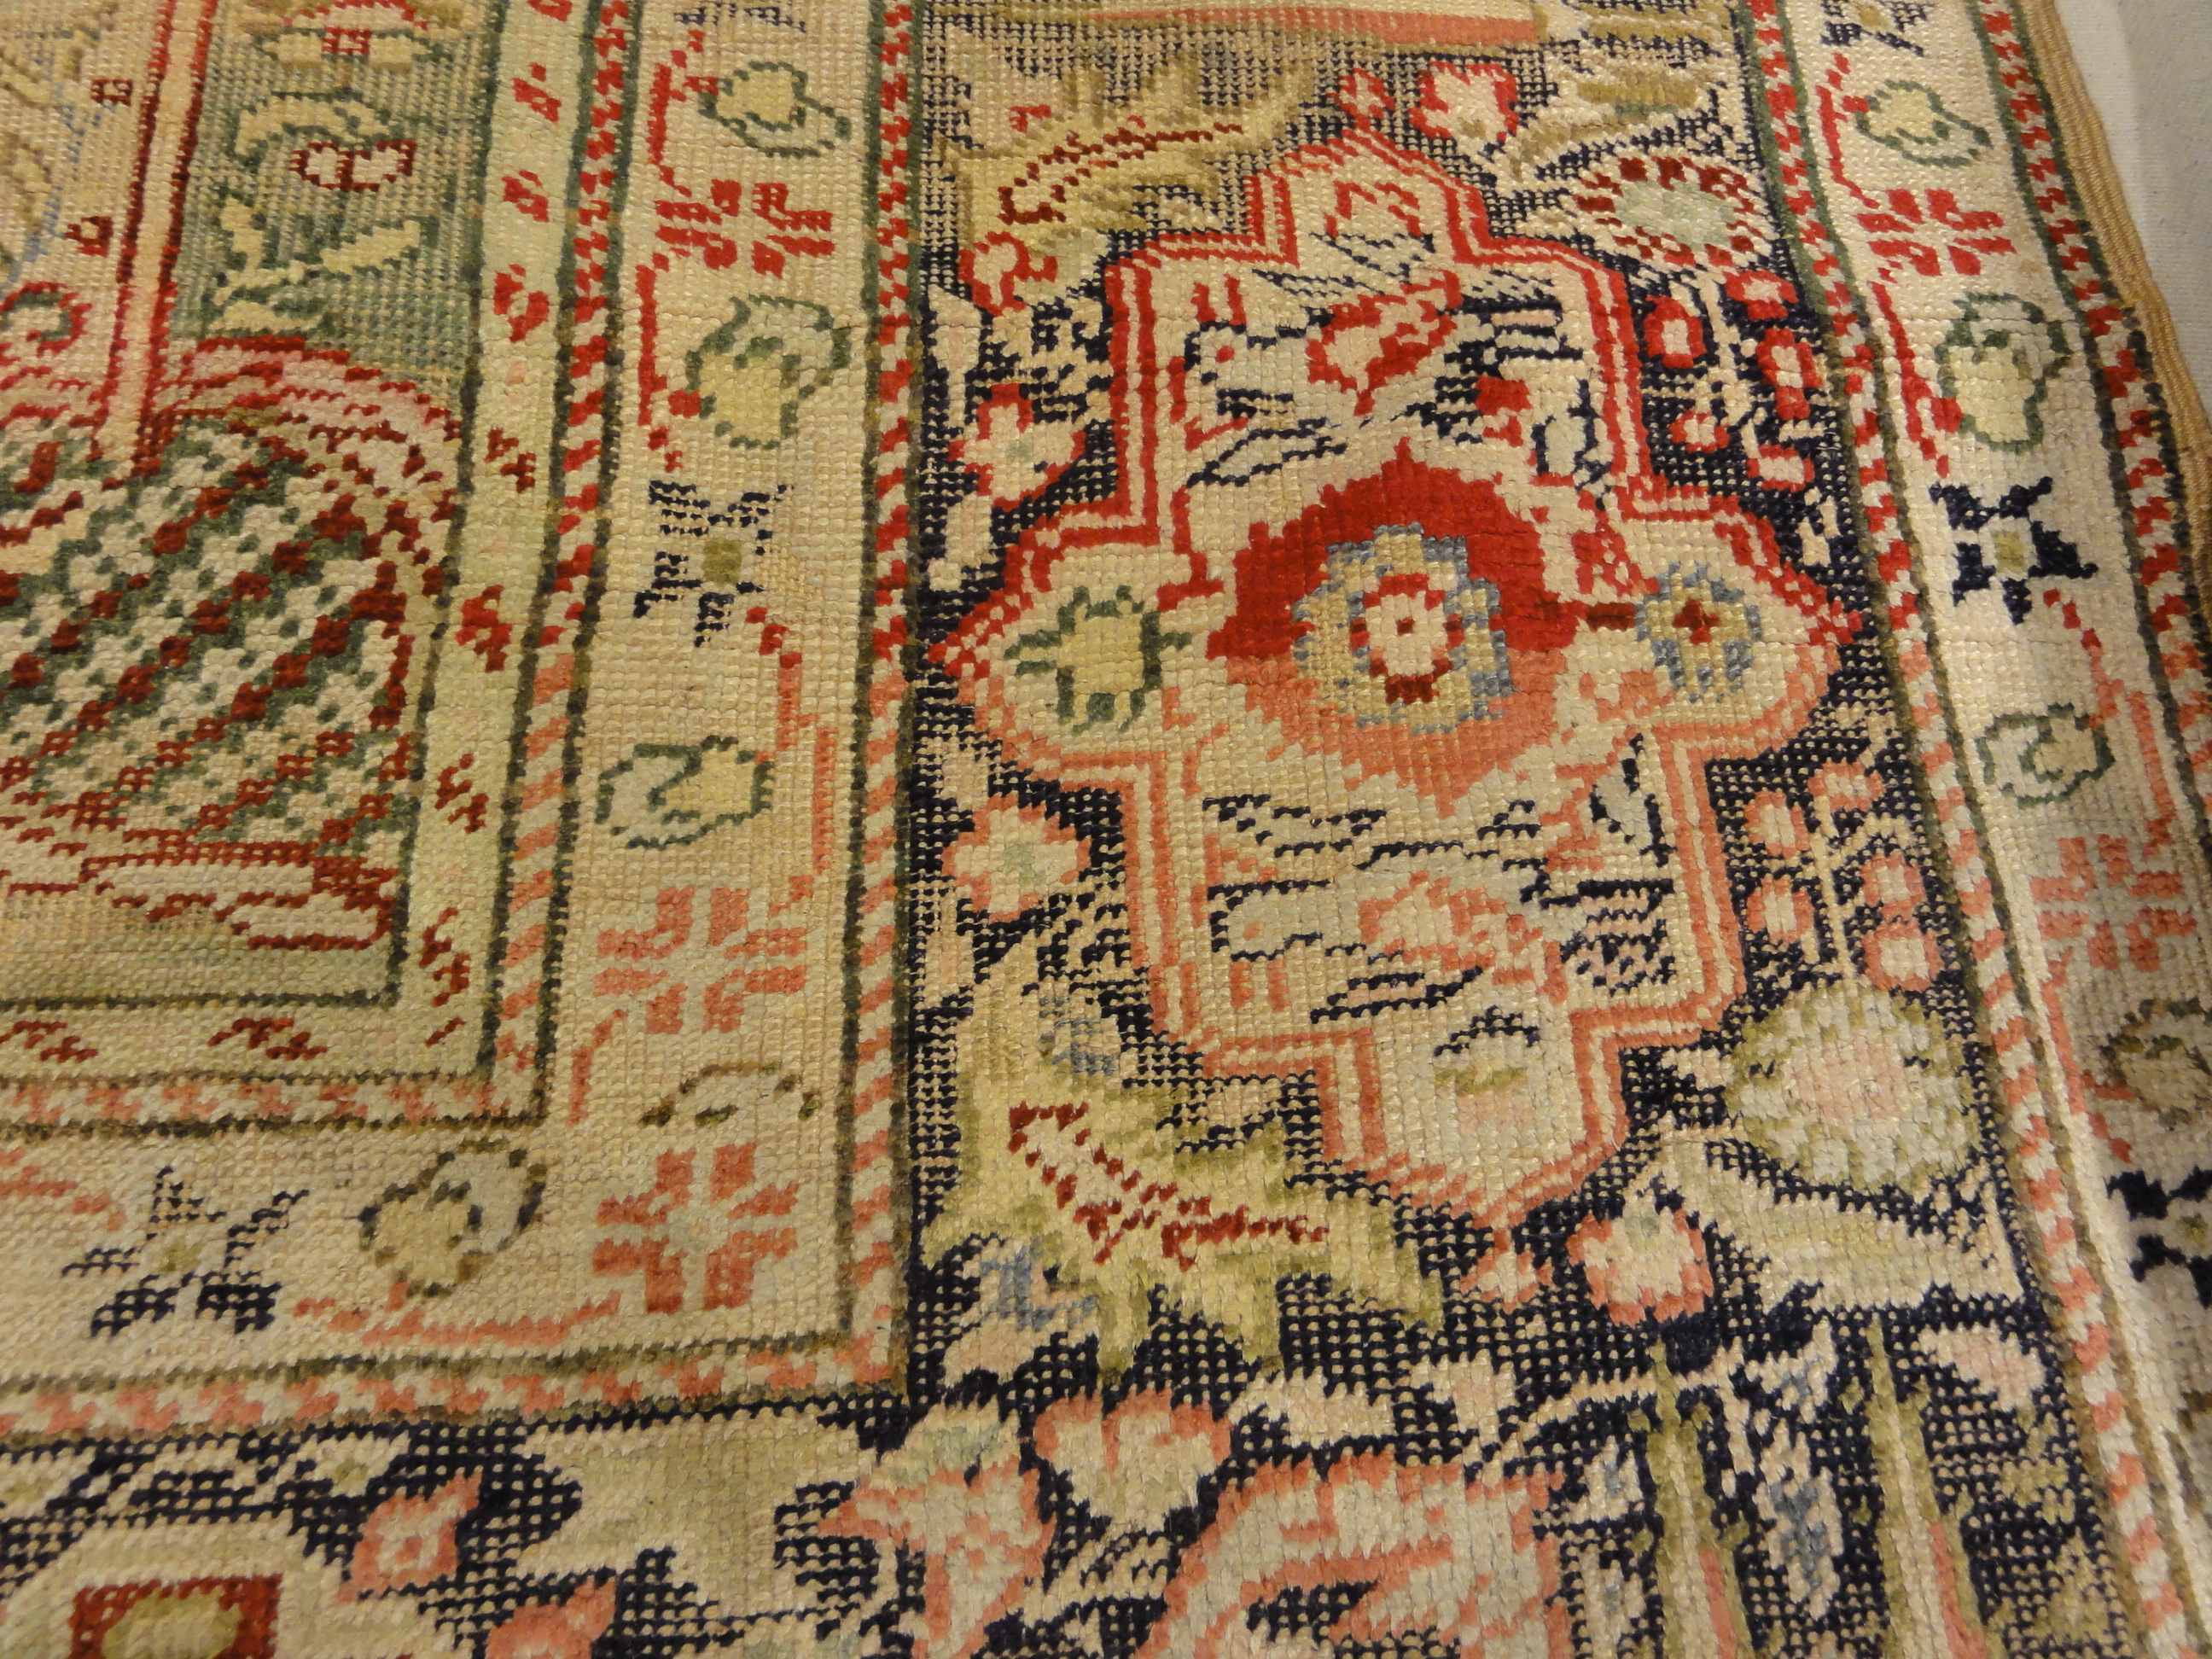 Antique Silk Turkish Kaysari Rug . A piece of genuine, woven carpet art sold by the Santa Barbara Design Center, Rugs and More.